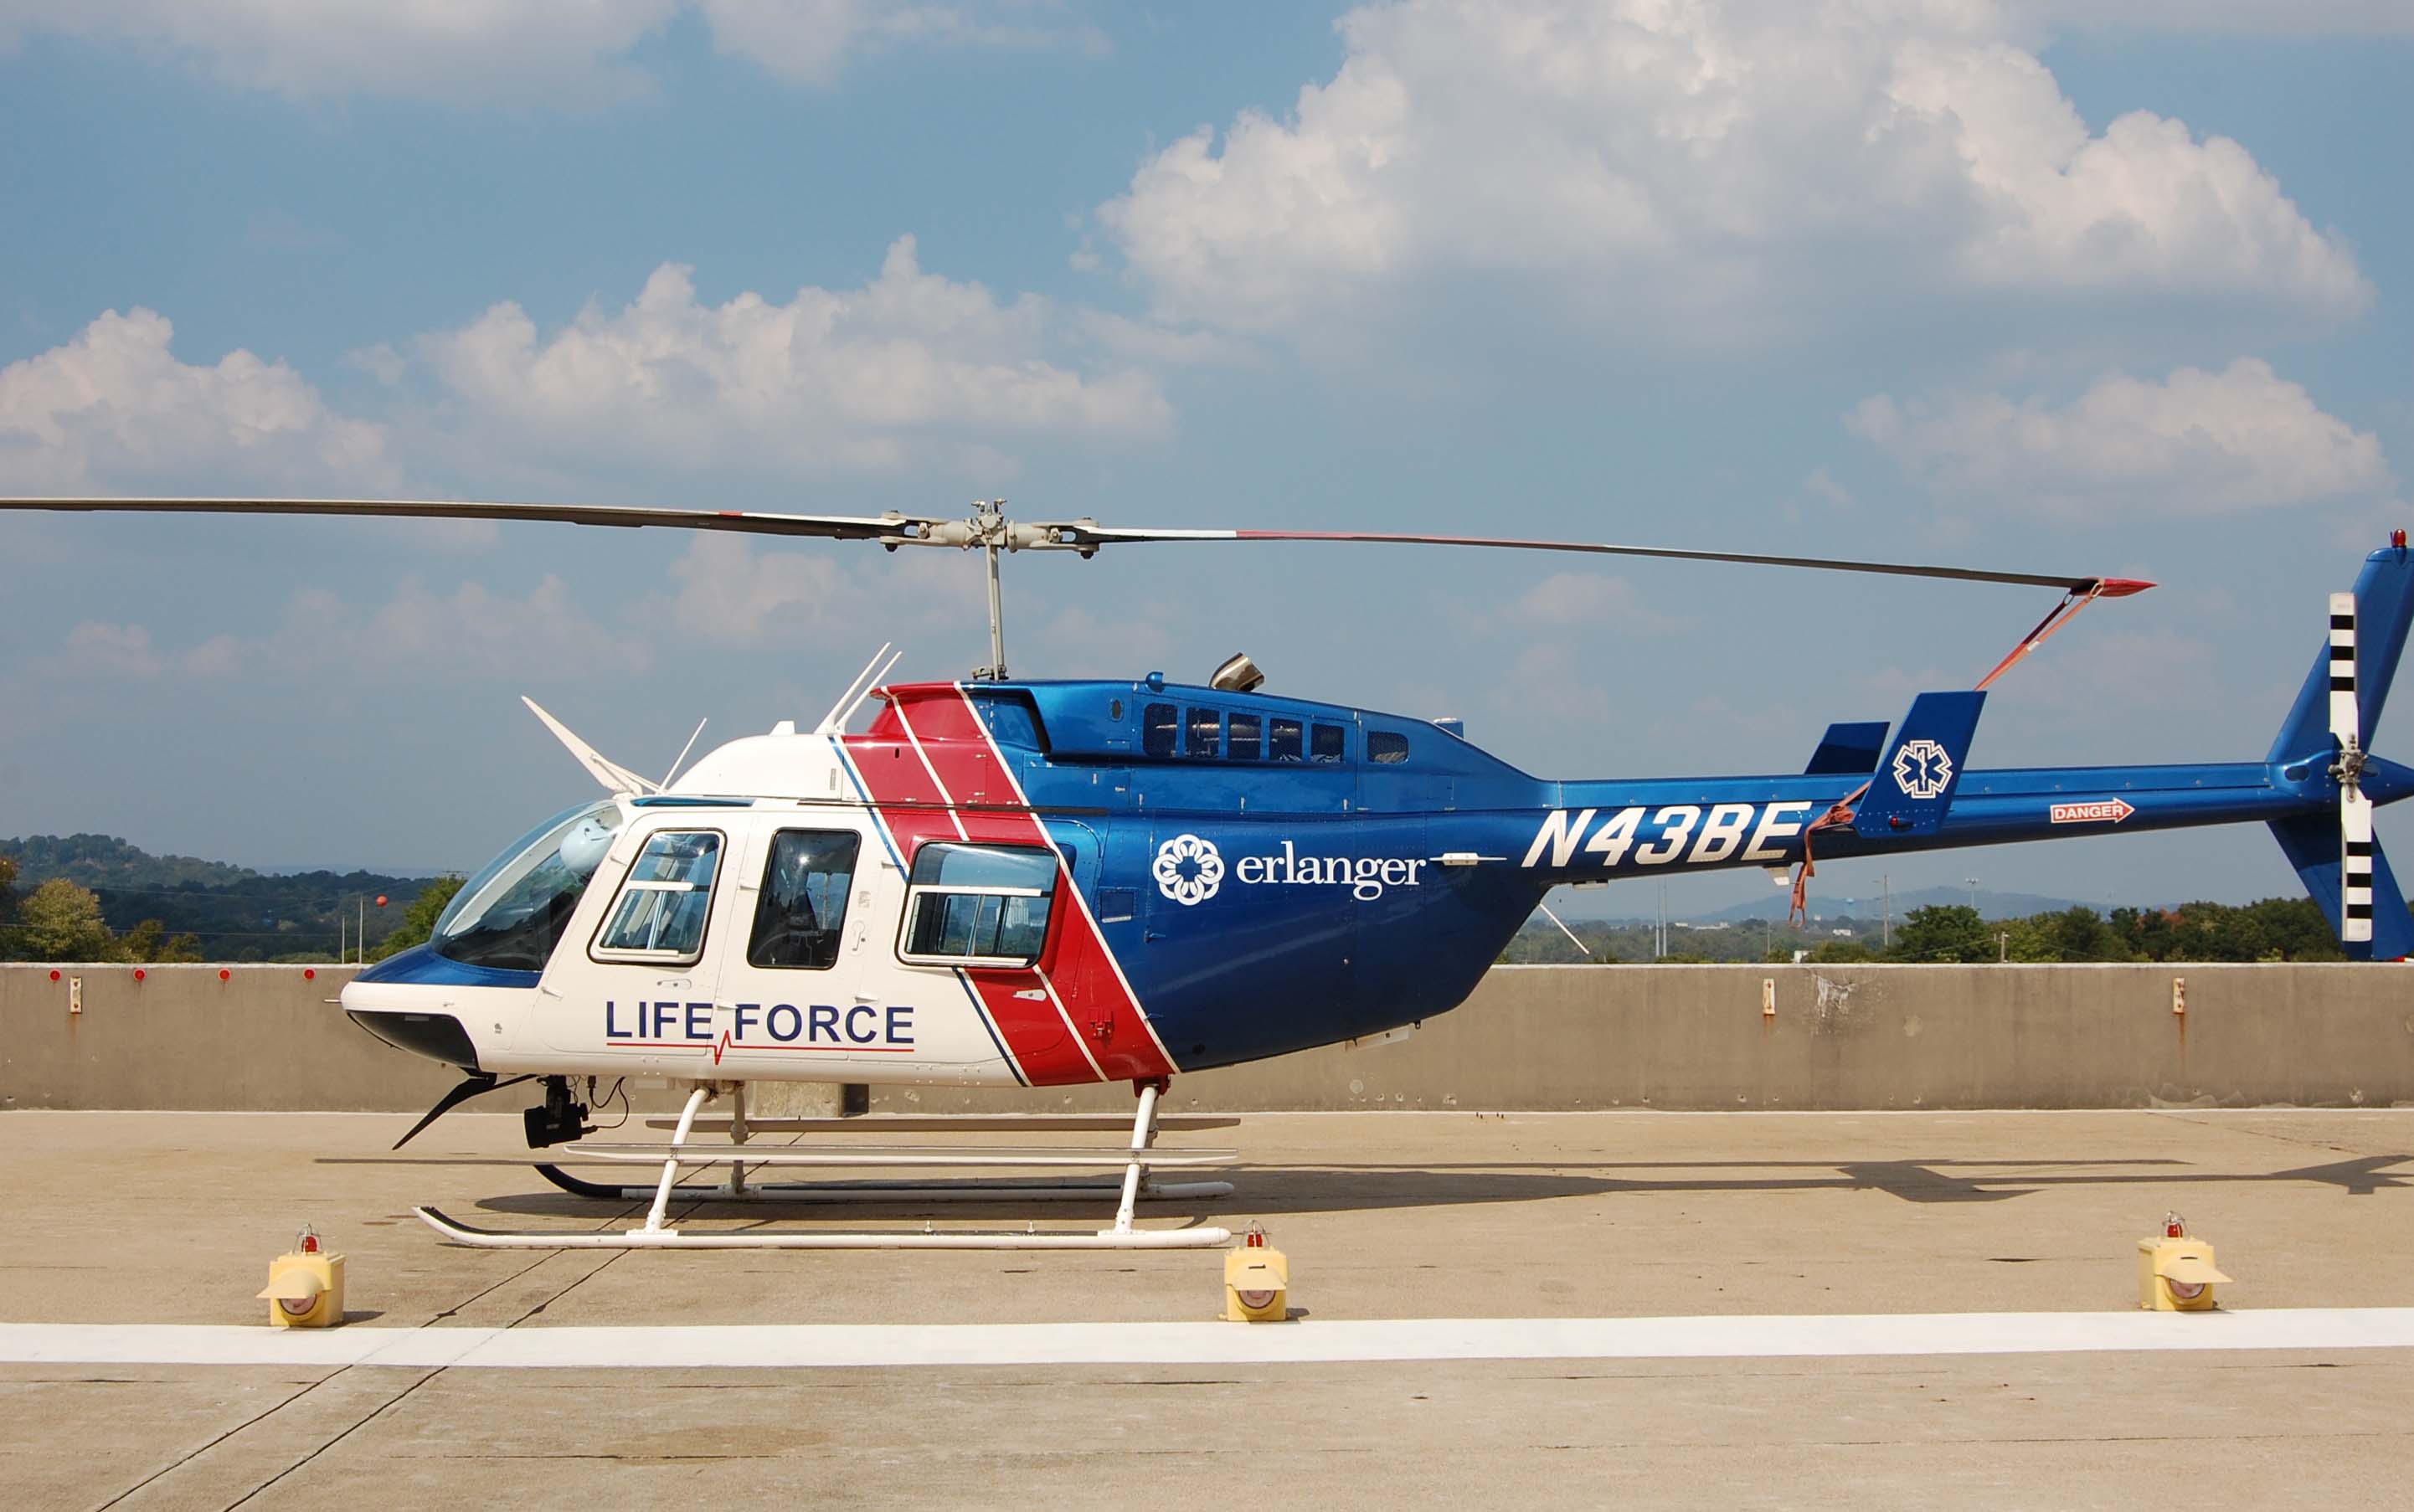 LIFE FORCE Air Medical receives national accreditation